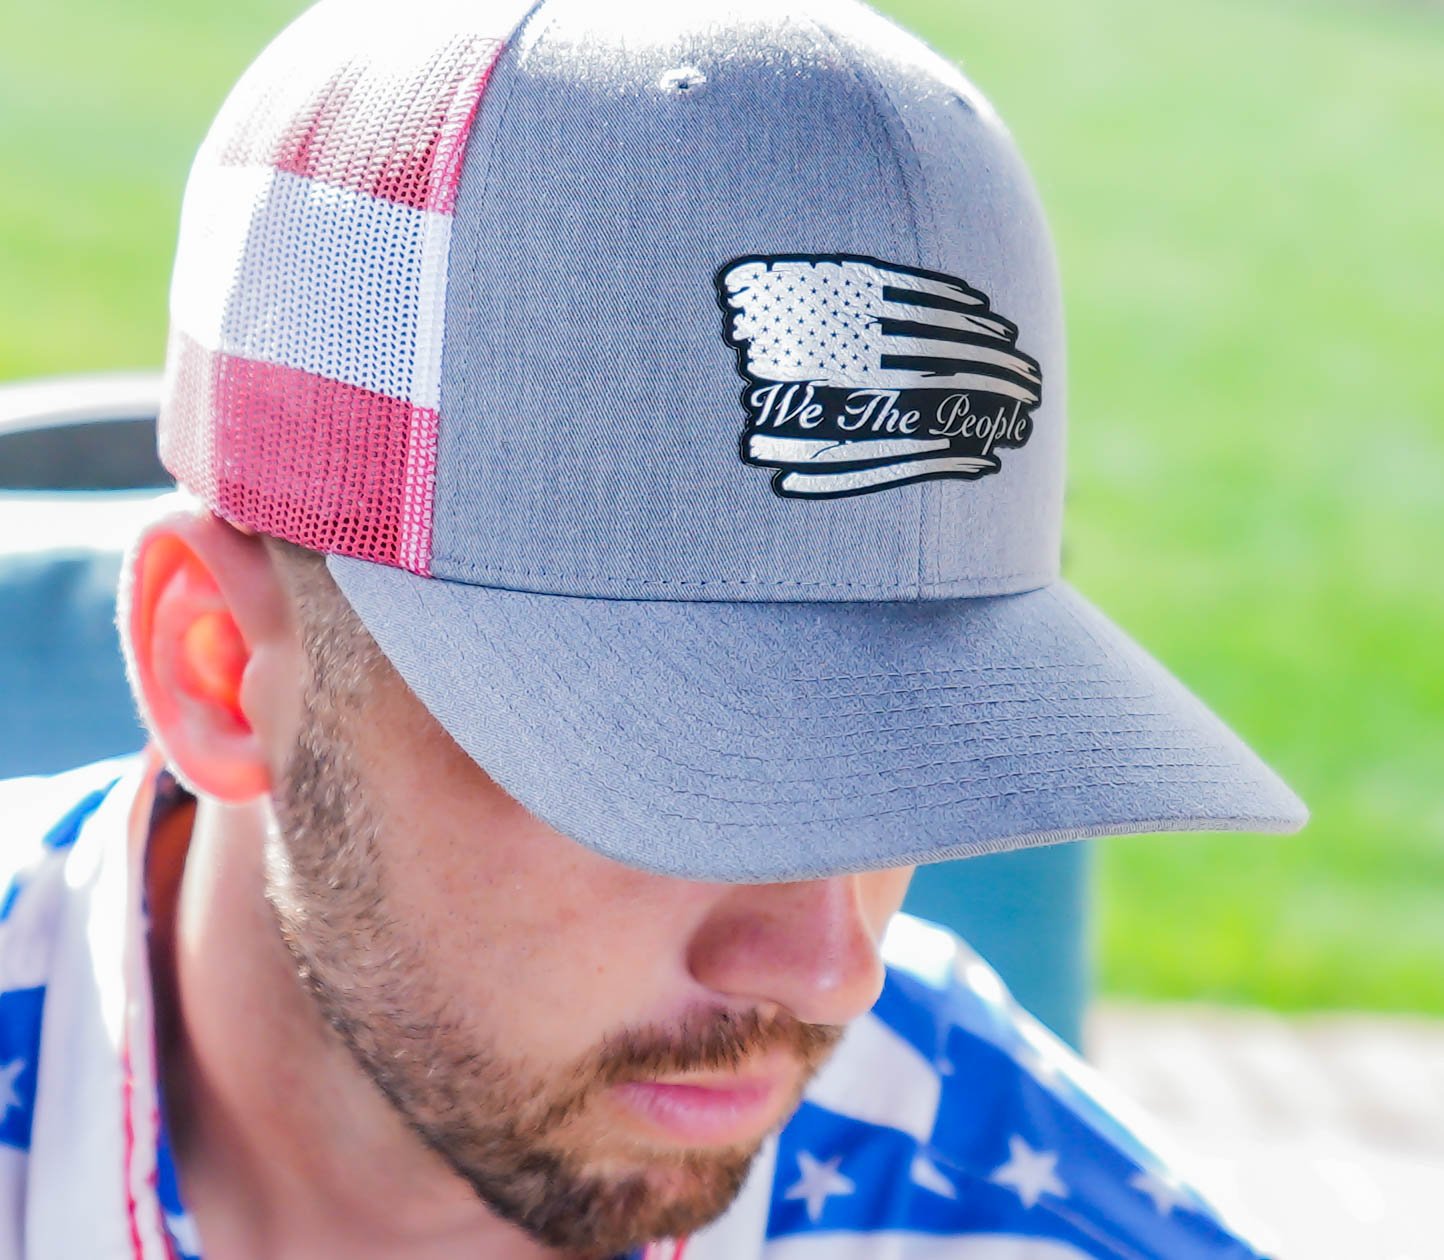 Torn Flag We The People Black Patch Hat - Greater Half